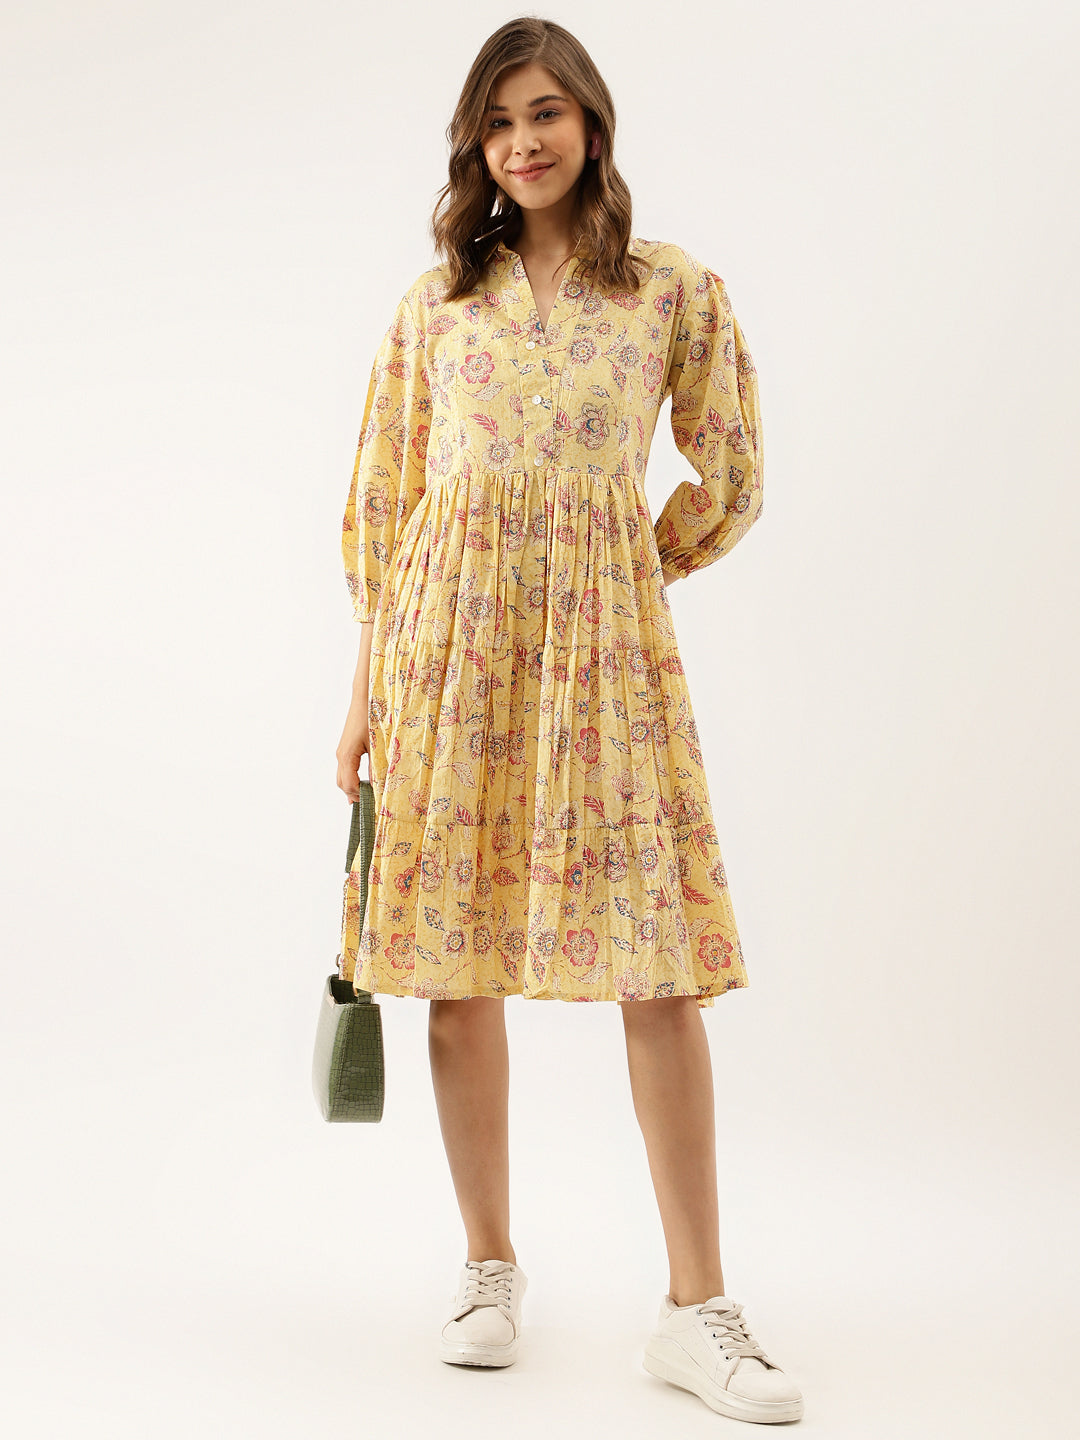 Divena Yellow Floral Printed Cotton Dress for Women